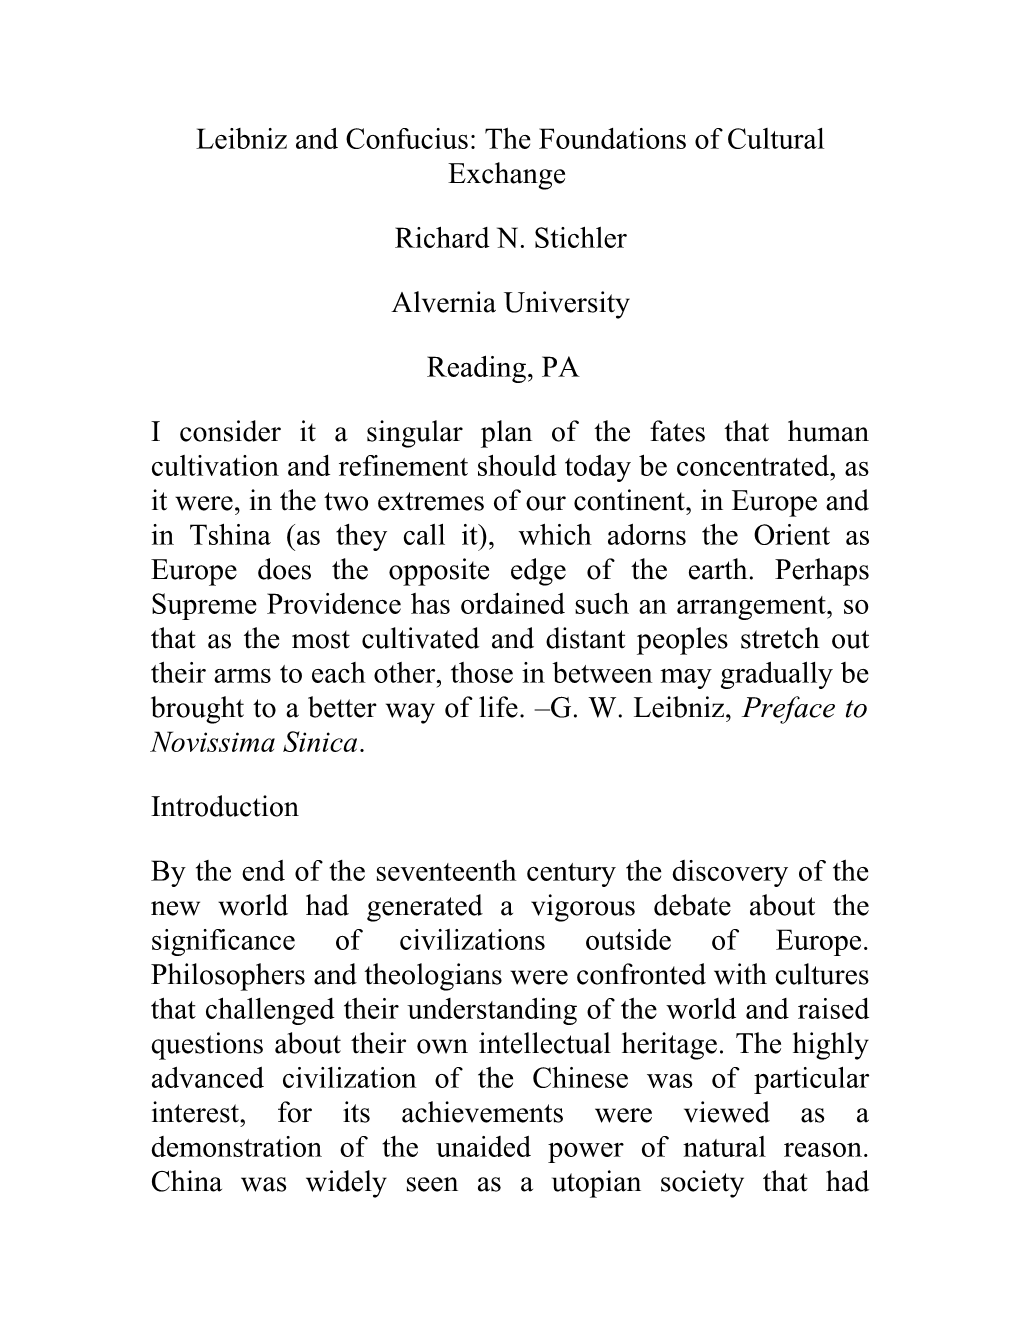 Leibniz and Confucius: the Foundations of Cultural Exchange